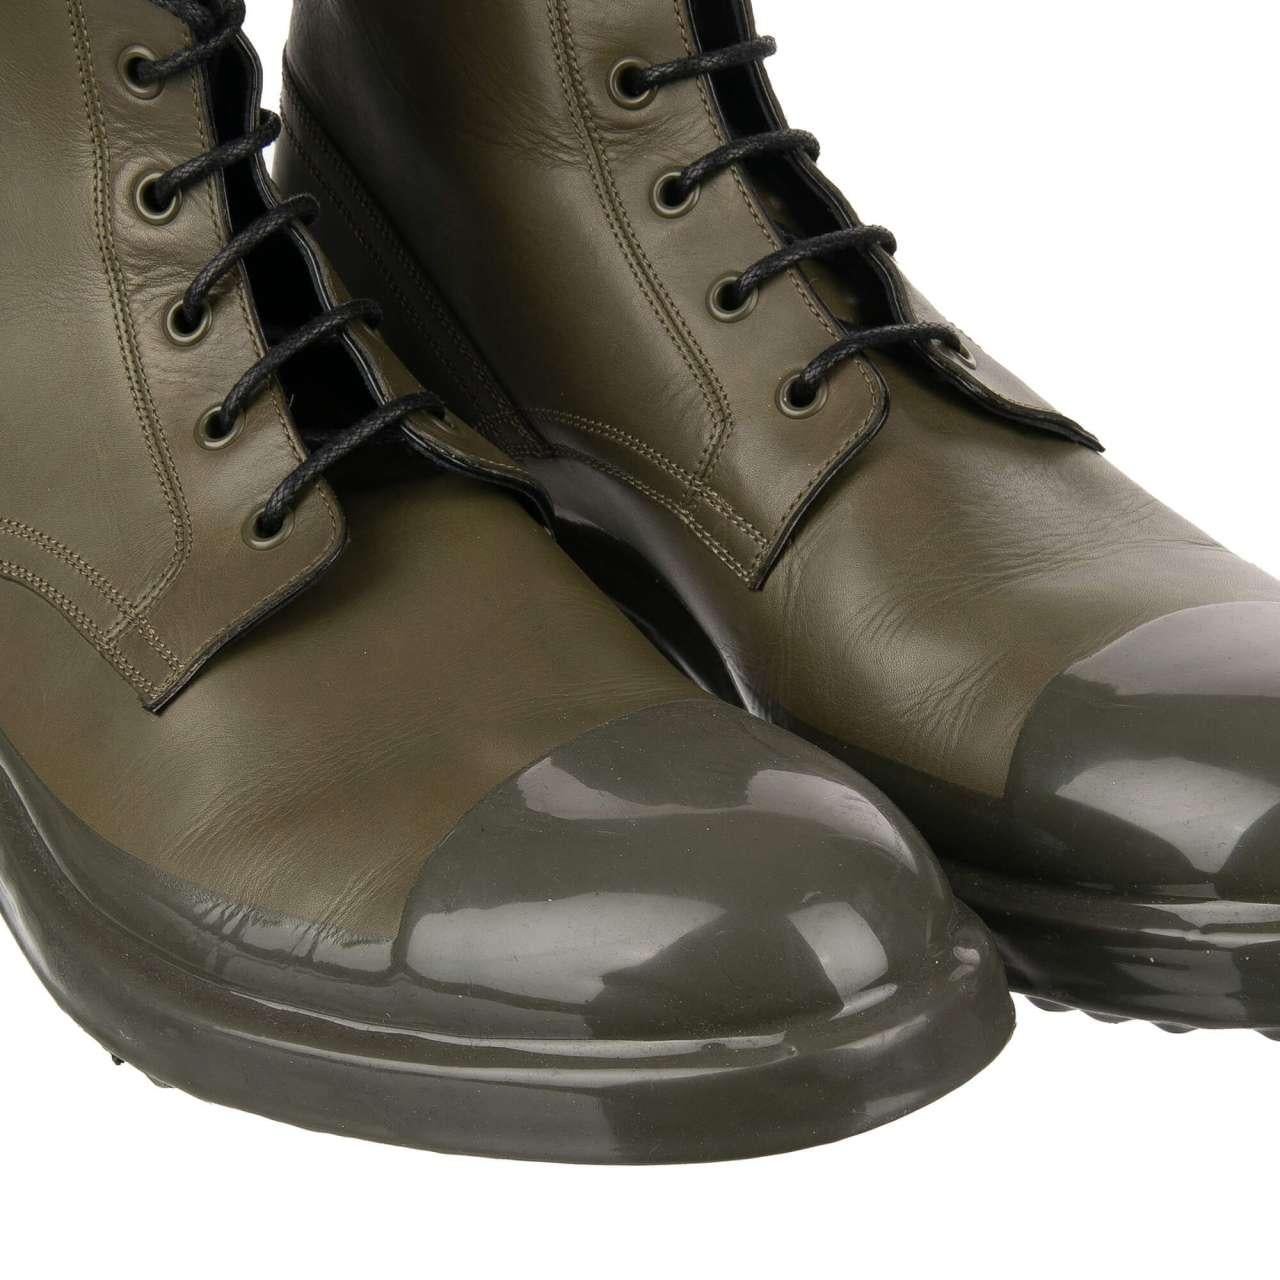 Dolce & Gabbana DG Logo Leather Ankle Boots FIRENZE Military Green EUR 44 For Sale 1